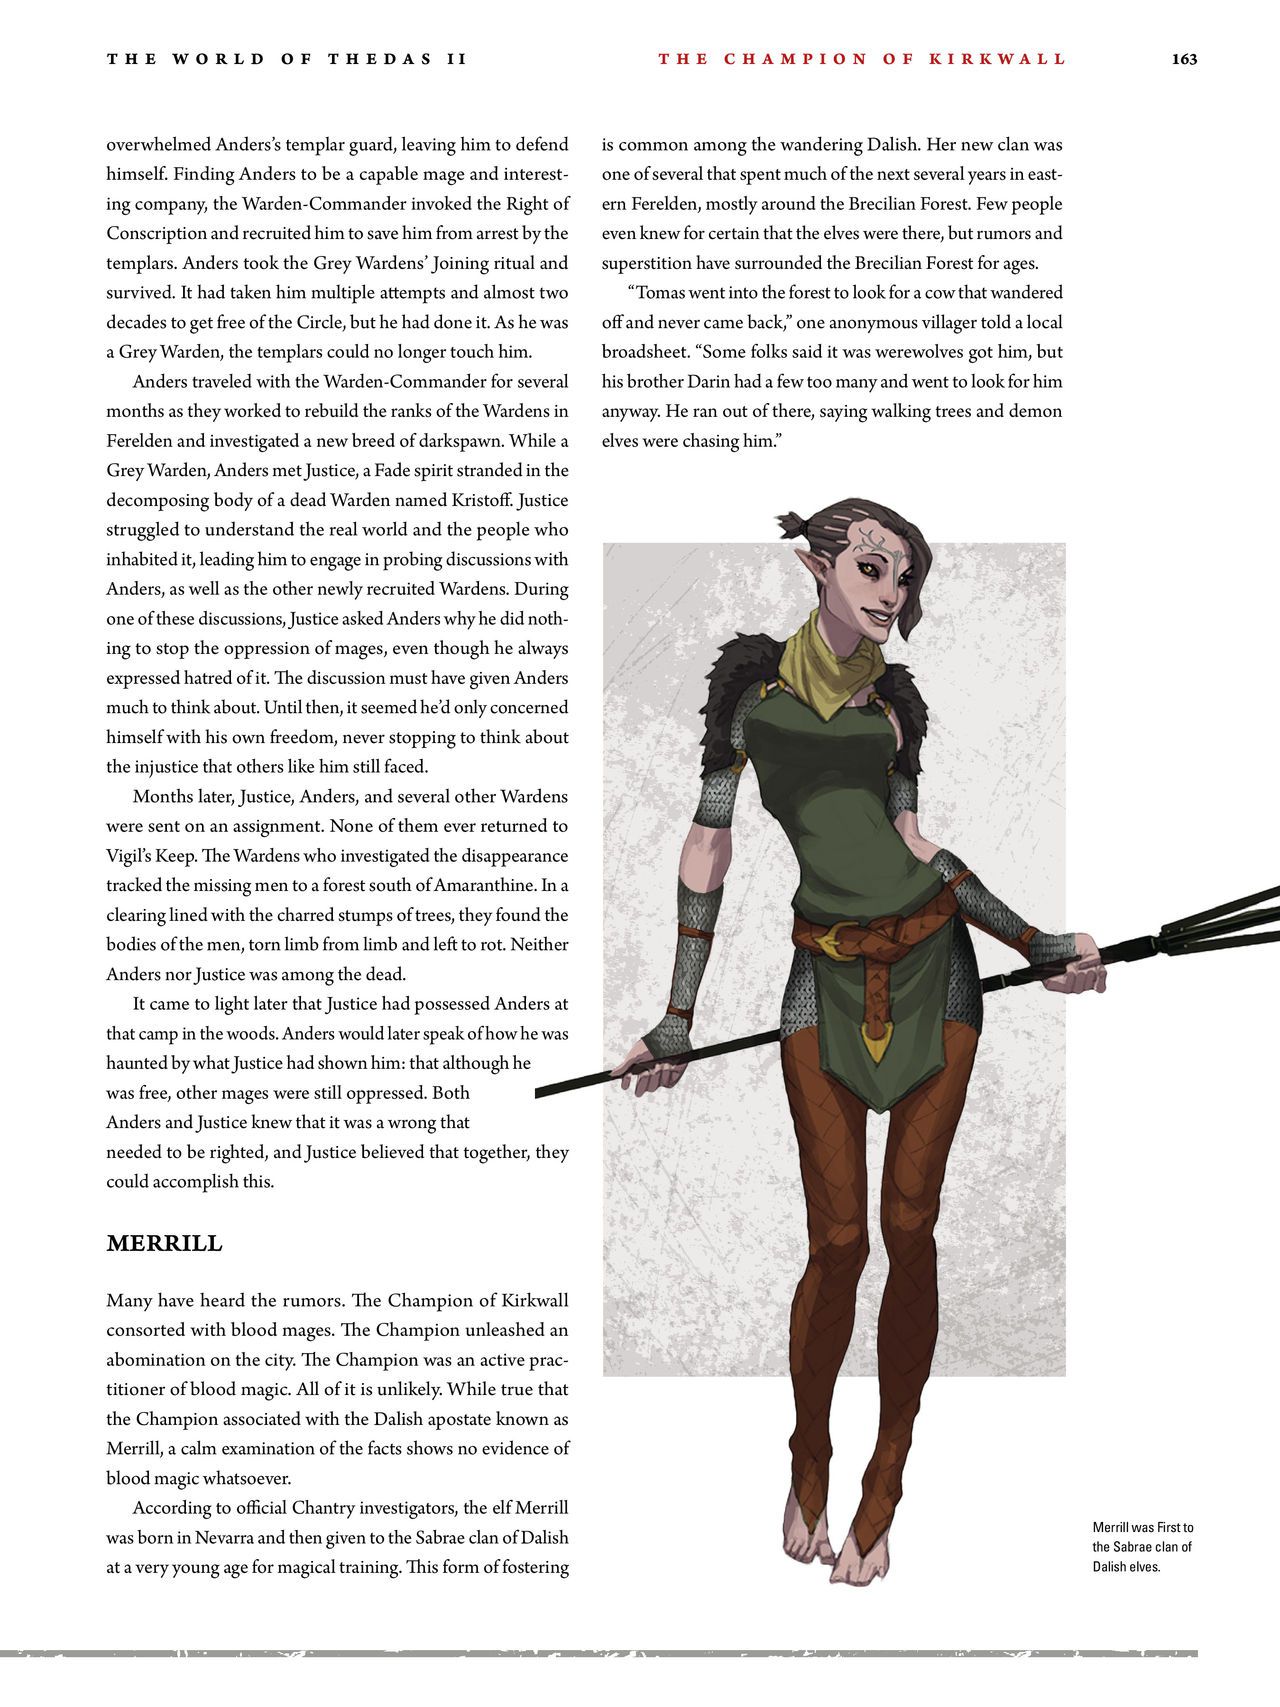 Dragon Age - The World of Thedas v02 159